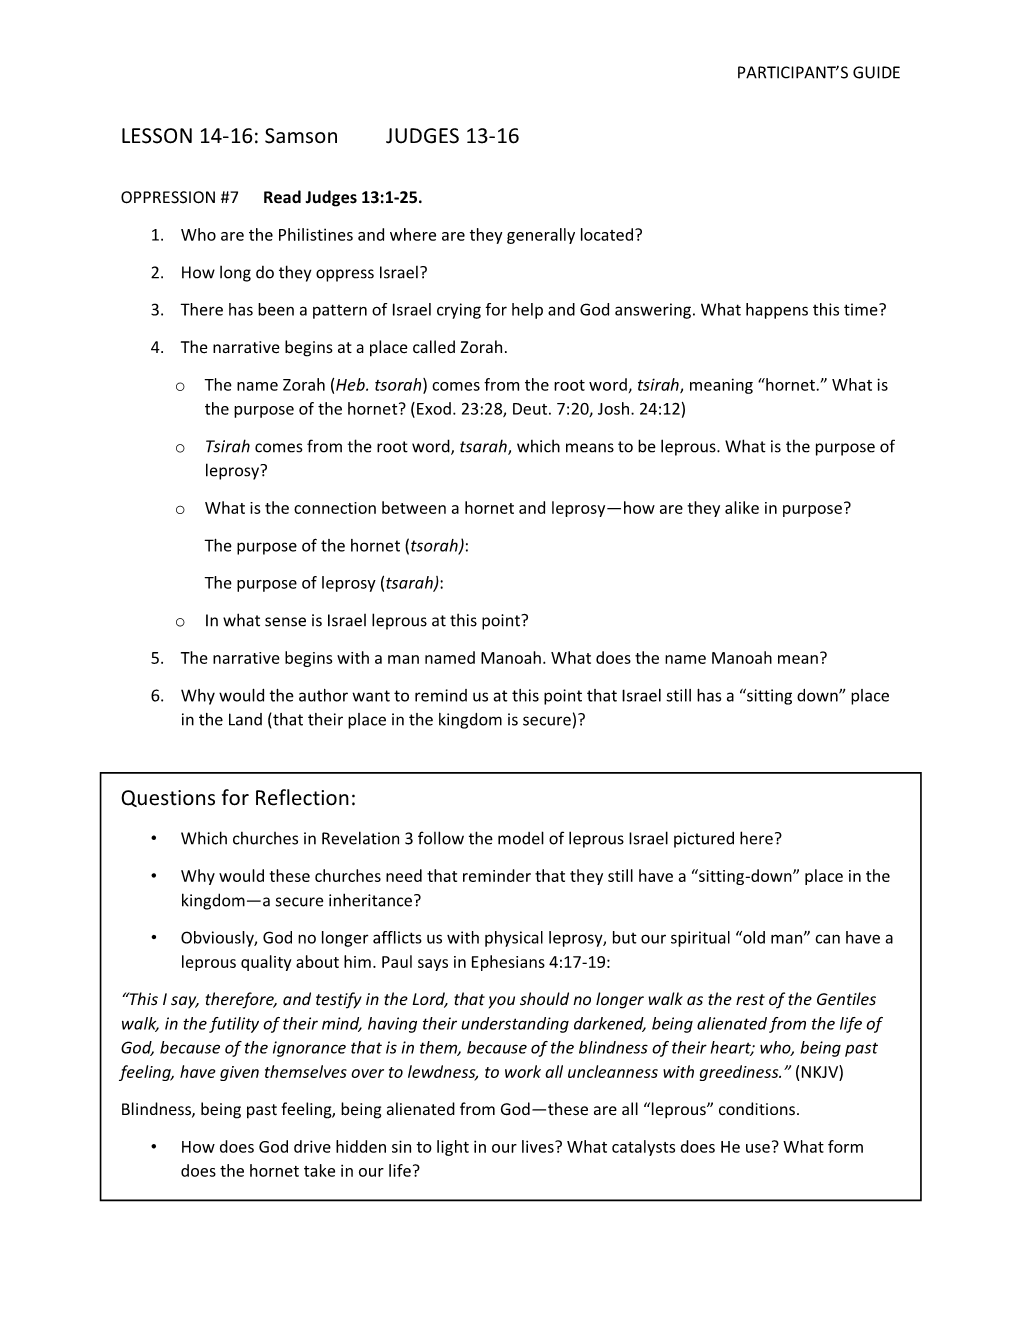 Samson JUDGES 13-16 Questions for Reflection